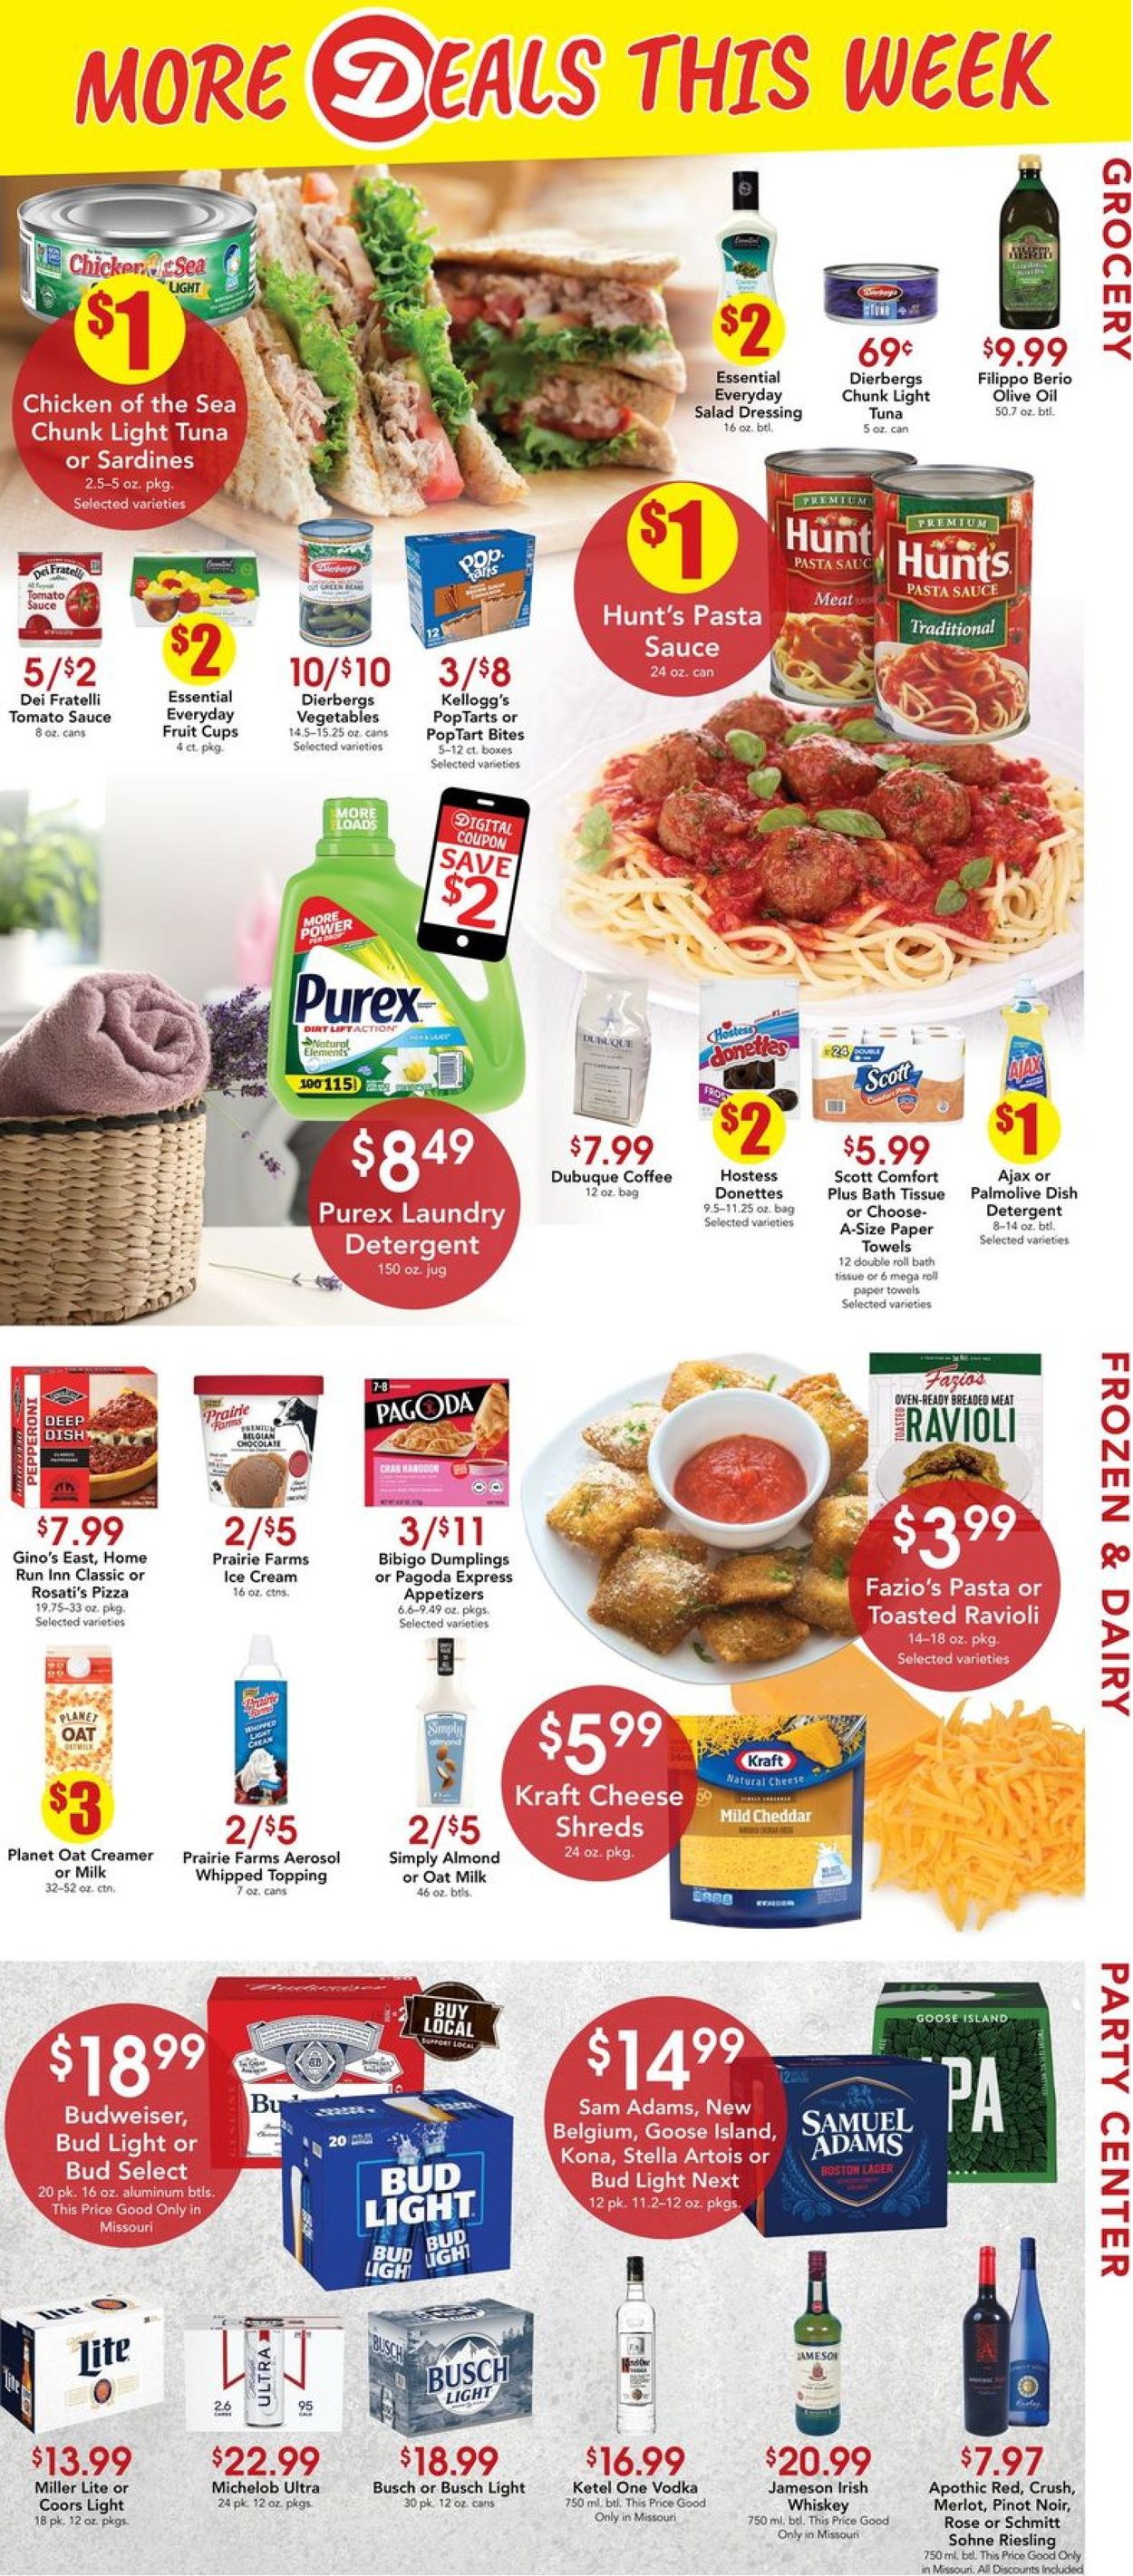 Catalogue Dierbergs from 02/15/2022